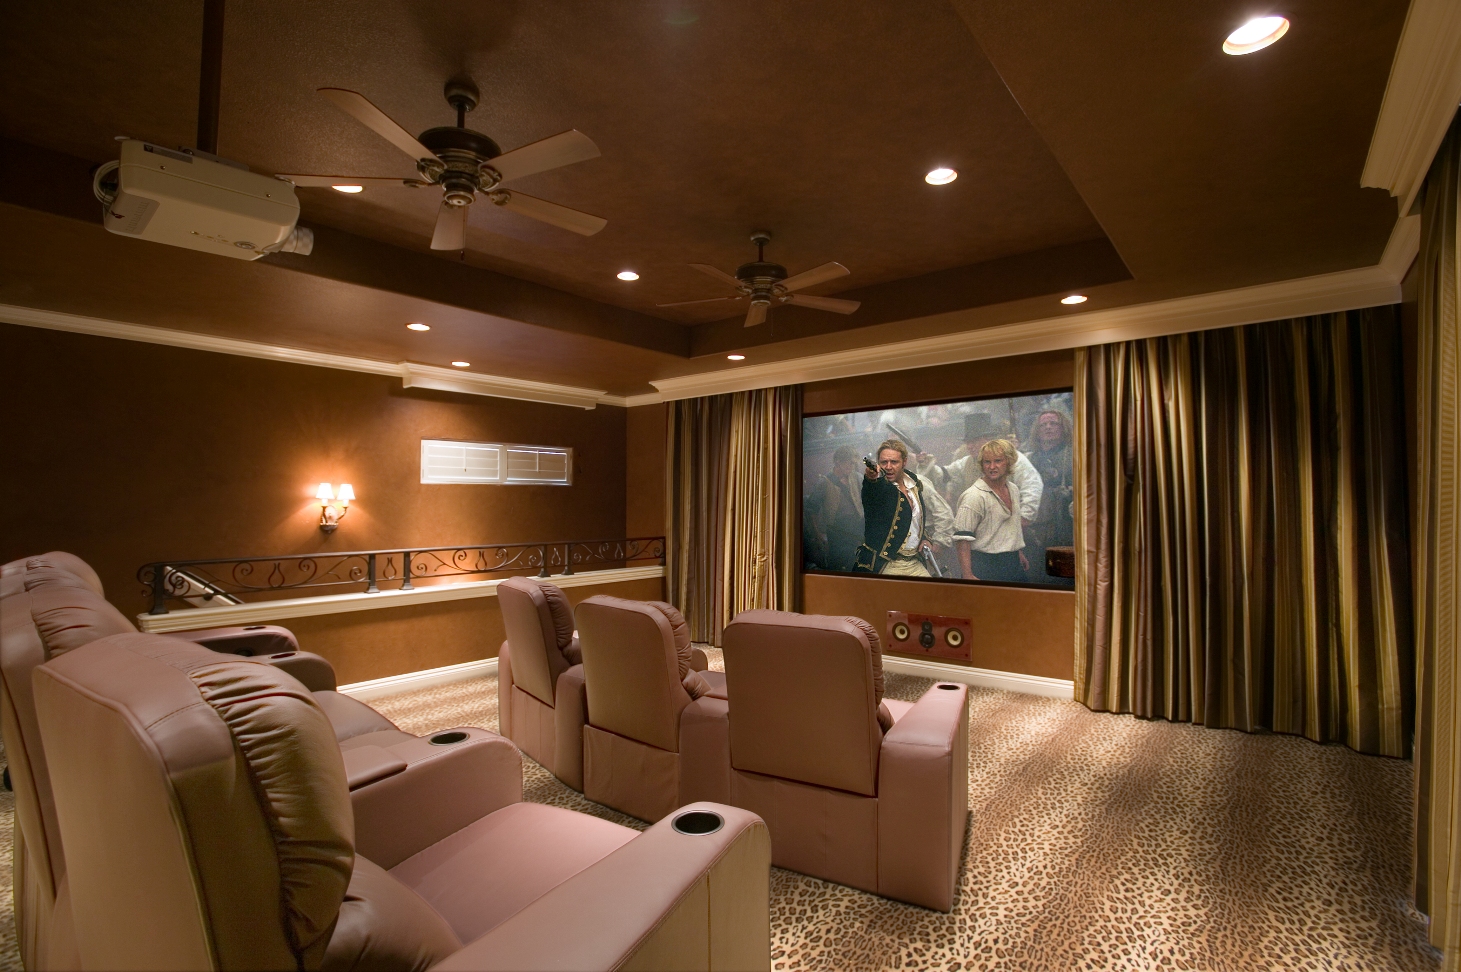 Home Theater Room